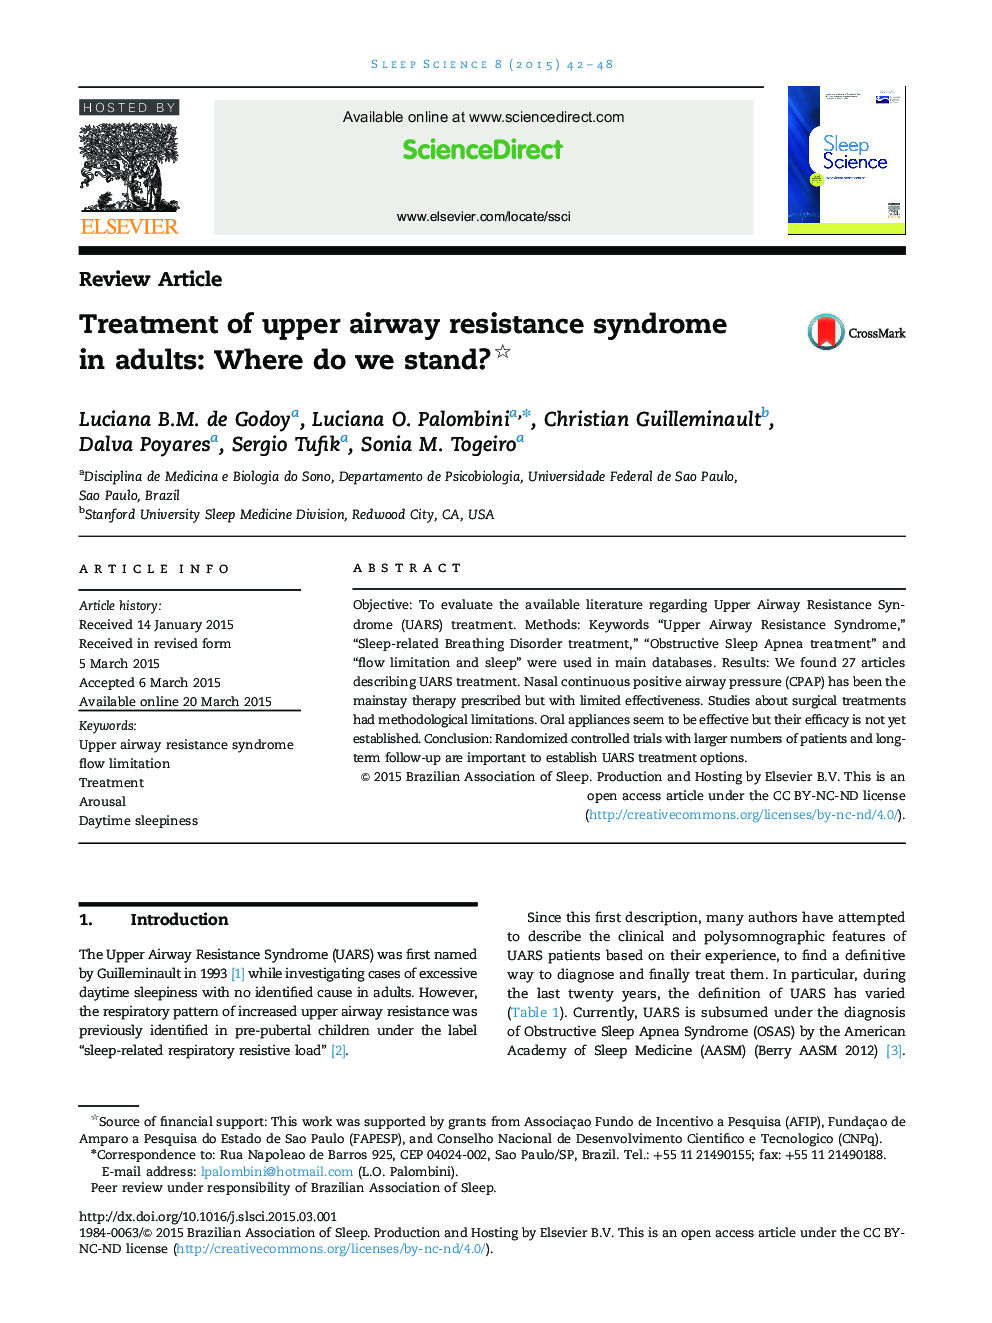 Treatment of upper airway resistance syndrome in adults: Where do we stand? 